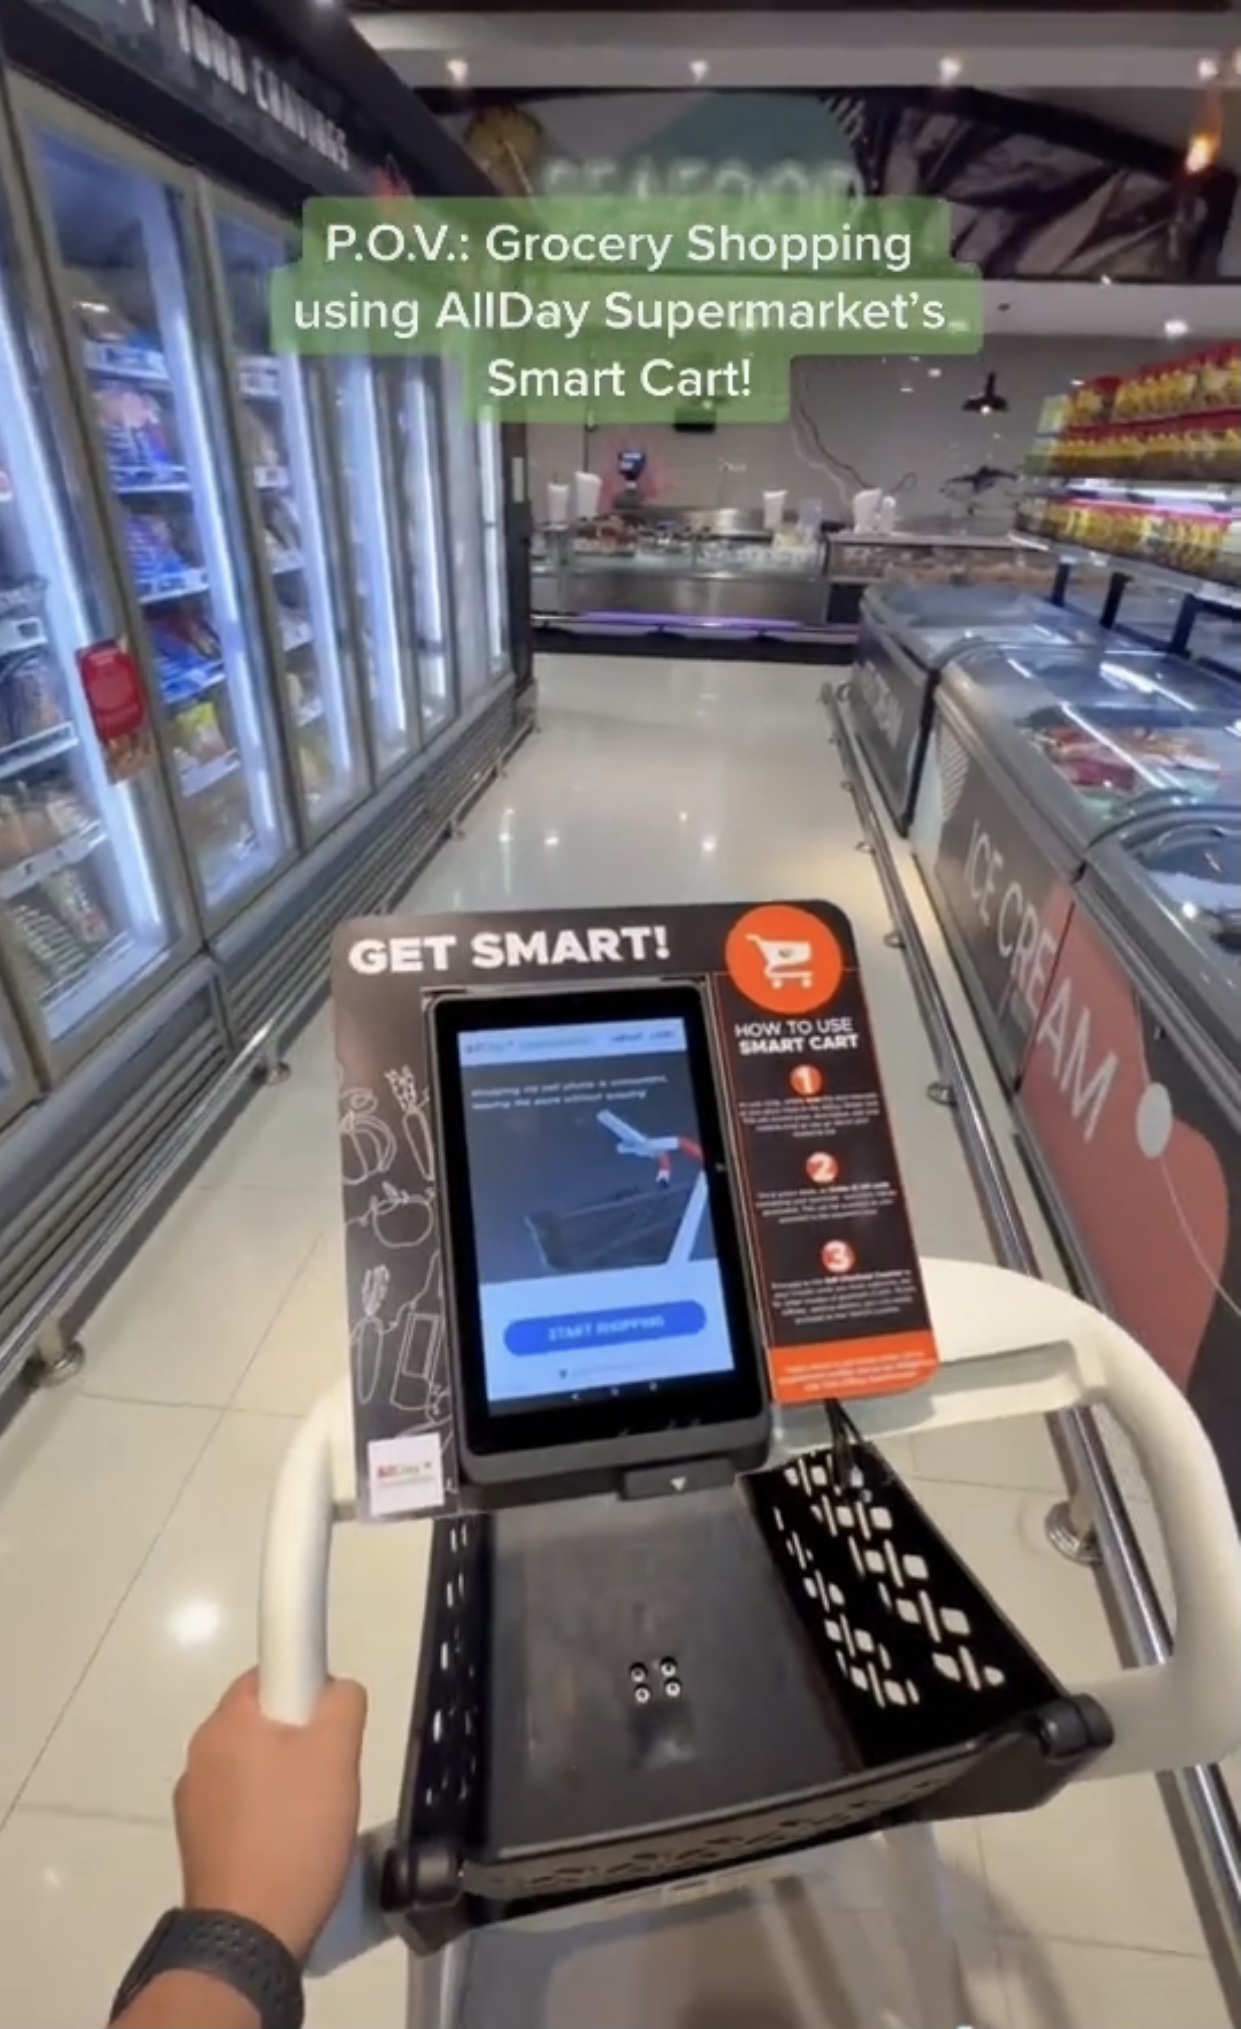 Smart shopping cart project in ALL Day supermarket has attracted more people shop there 